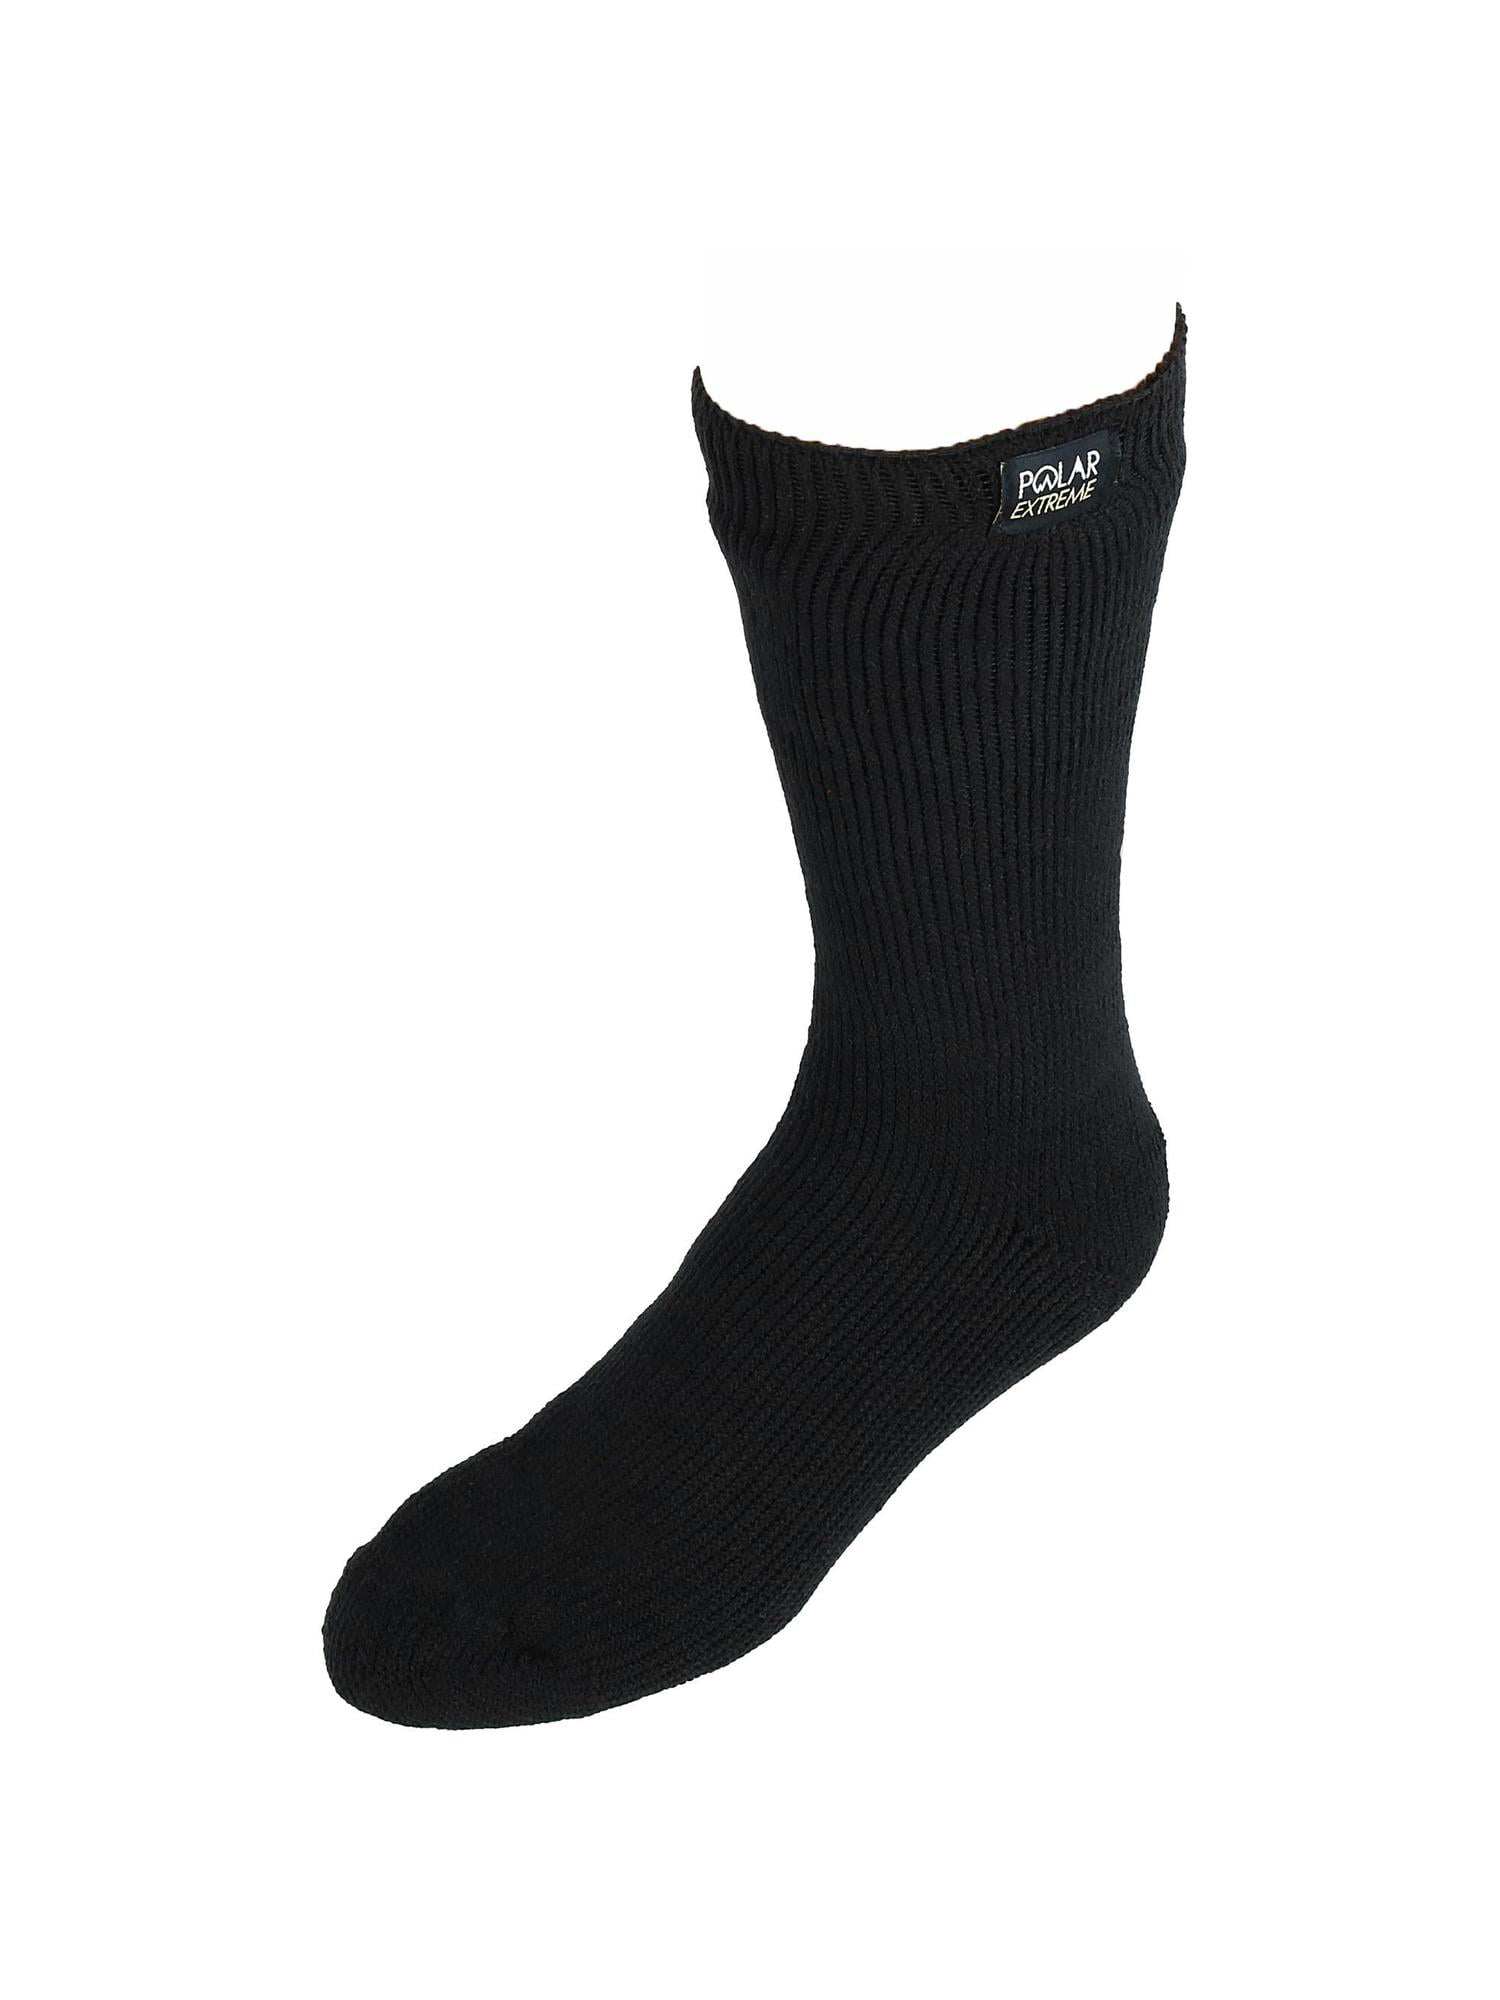 Polar Extreme Insulated Thermal Socks Mens Multi-color Marl Sock Size 10-13 SALE 